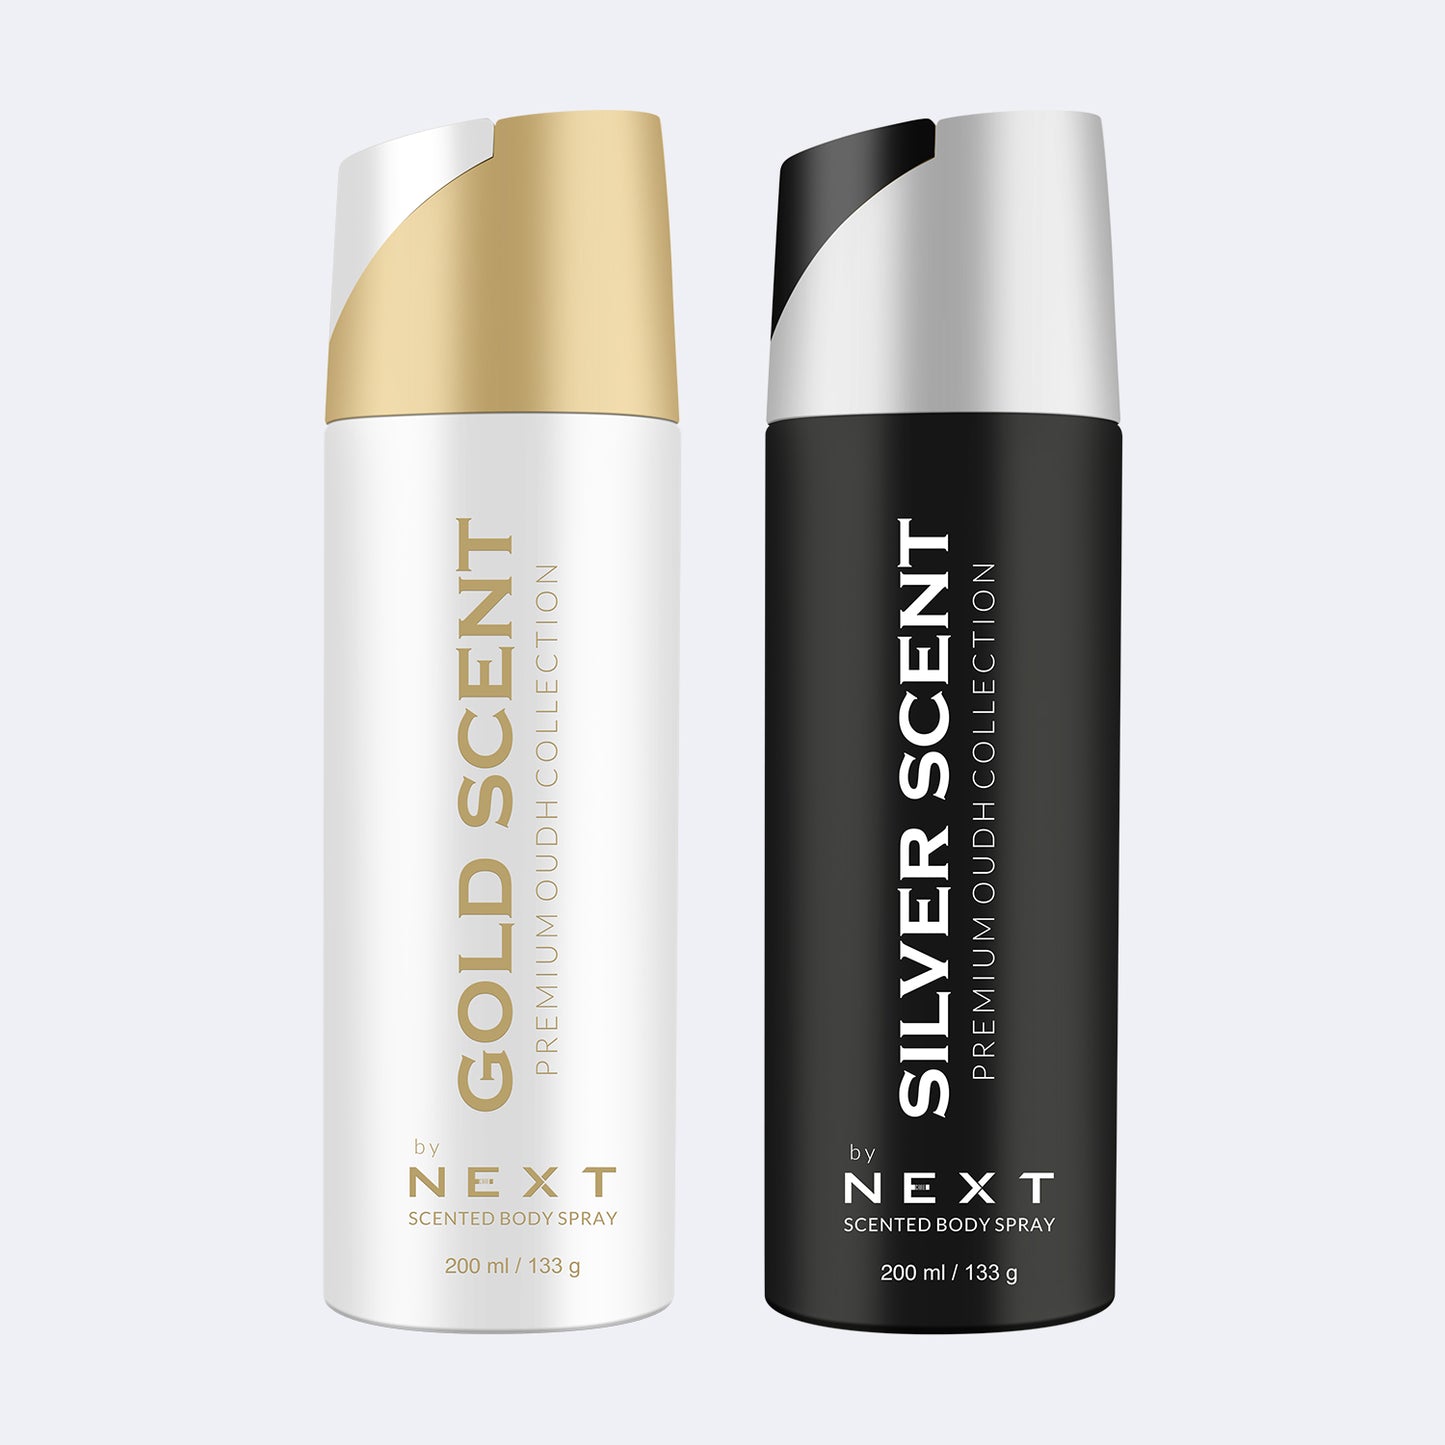 NEXT Pack of 2 Deodorants - Gold and Silver Scent - 200ml Each